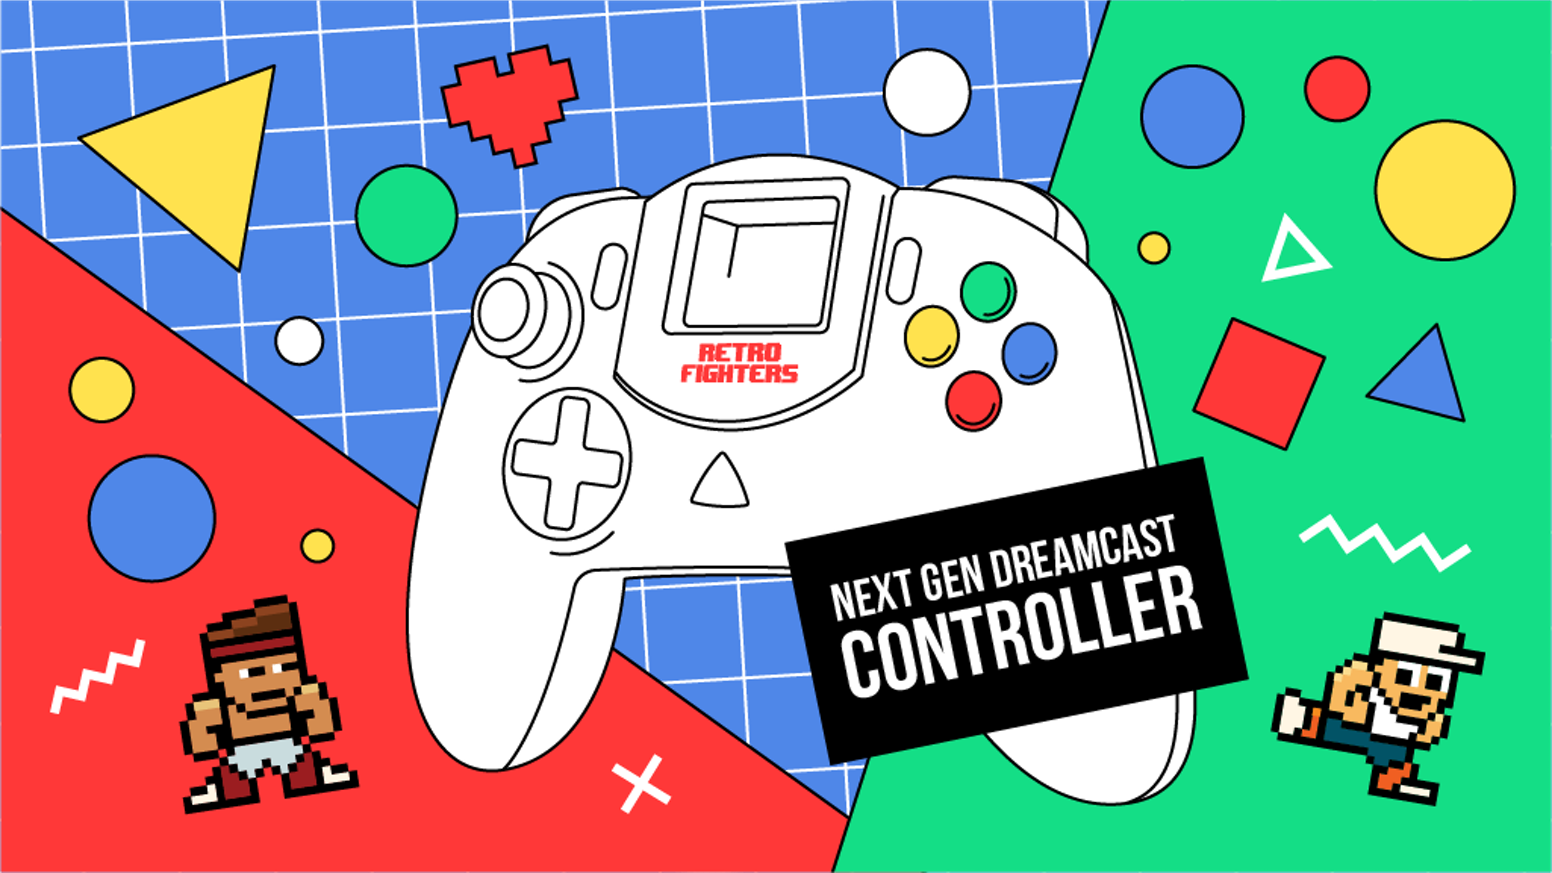 Retro Fighters Dreamcast Controller Update